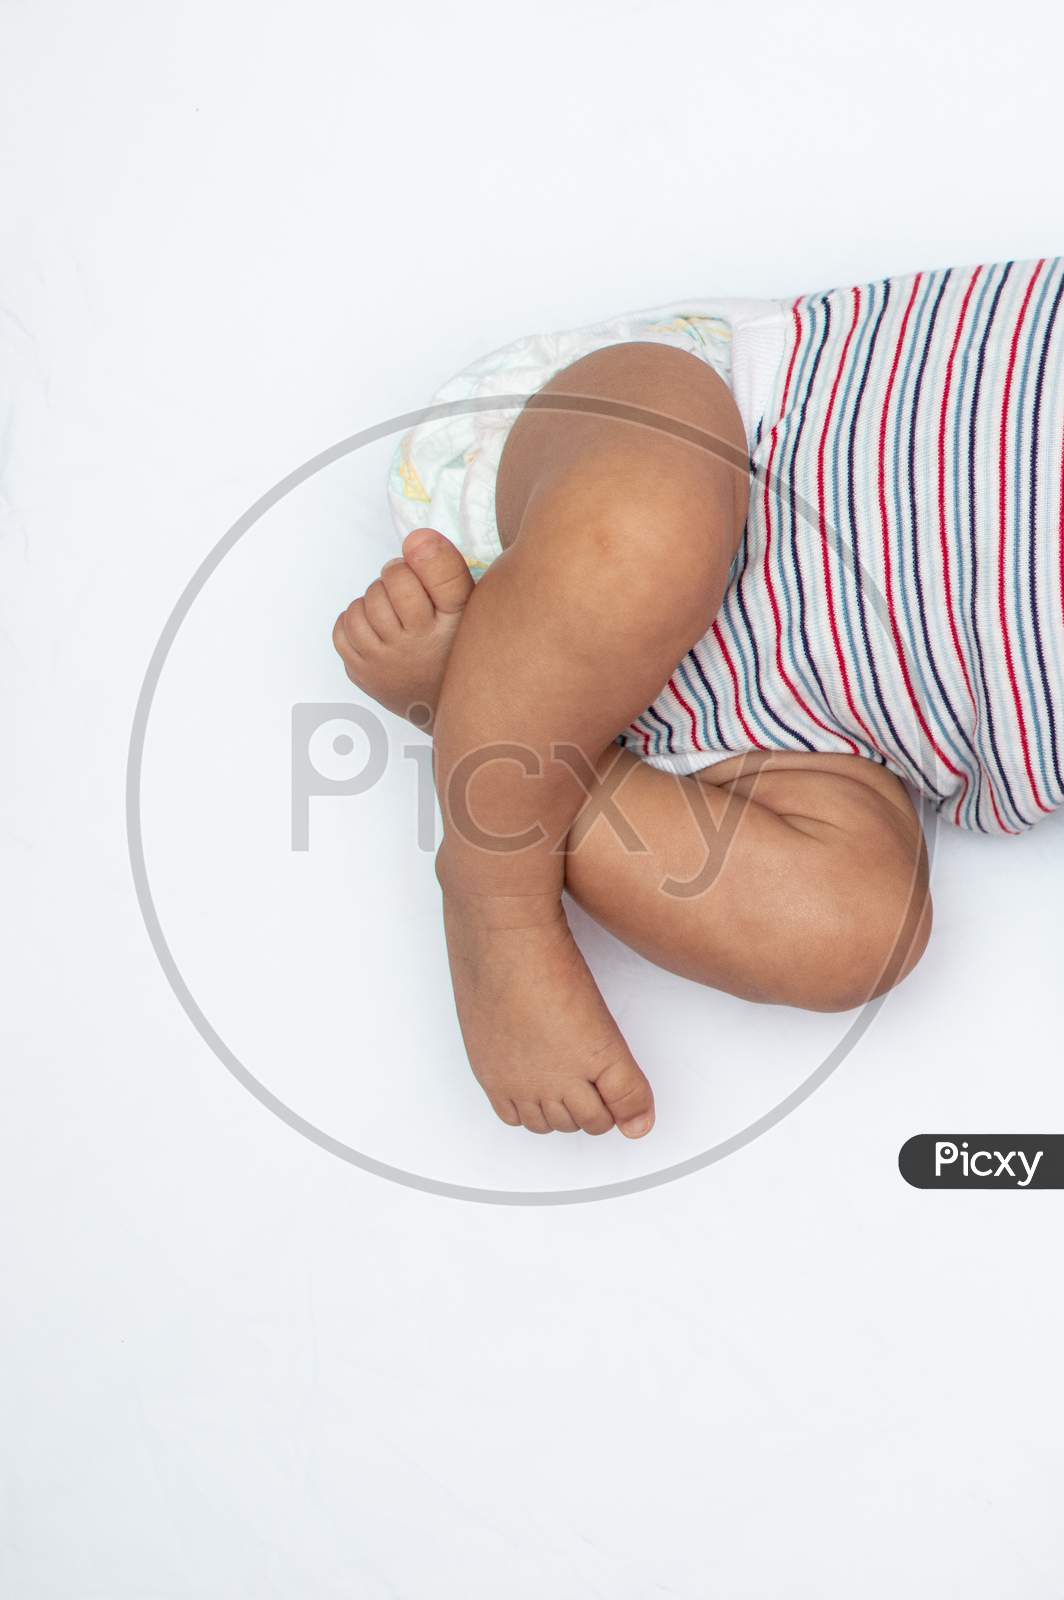 Crossed Legs Of Infant On A White Background